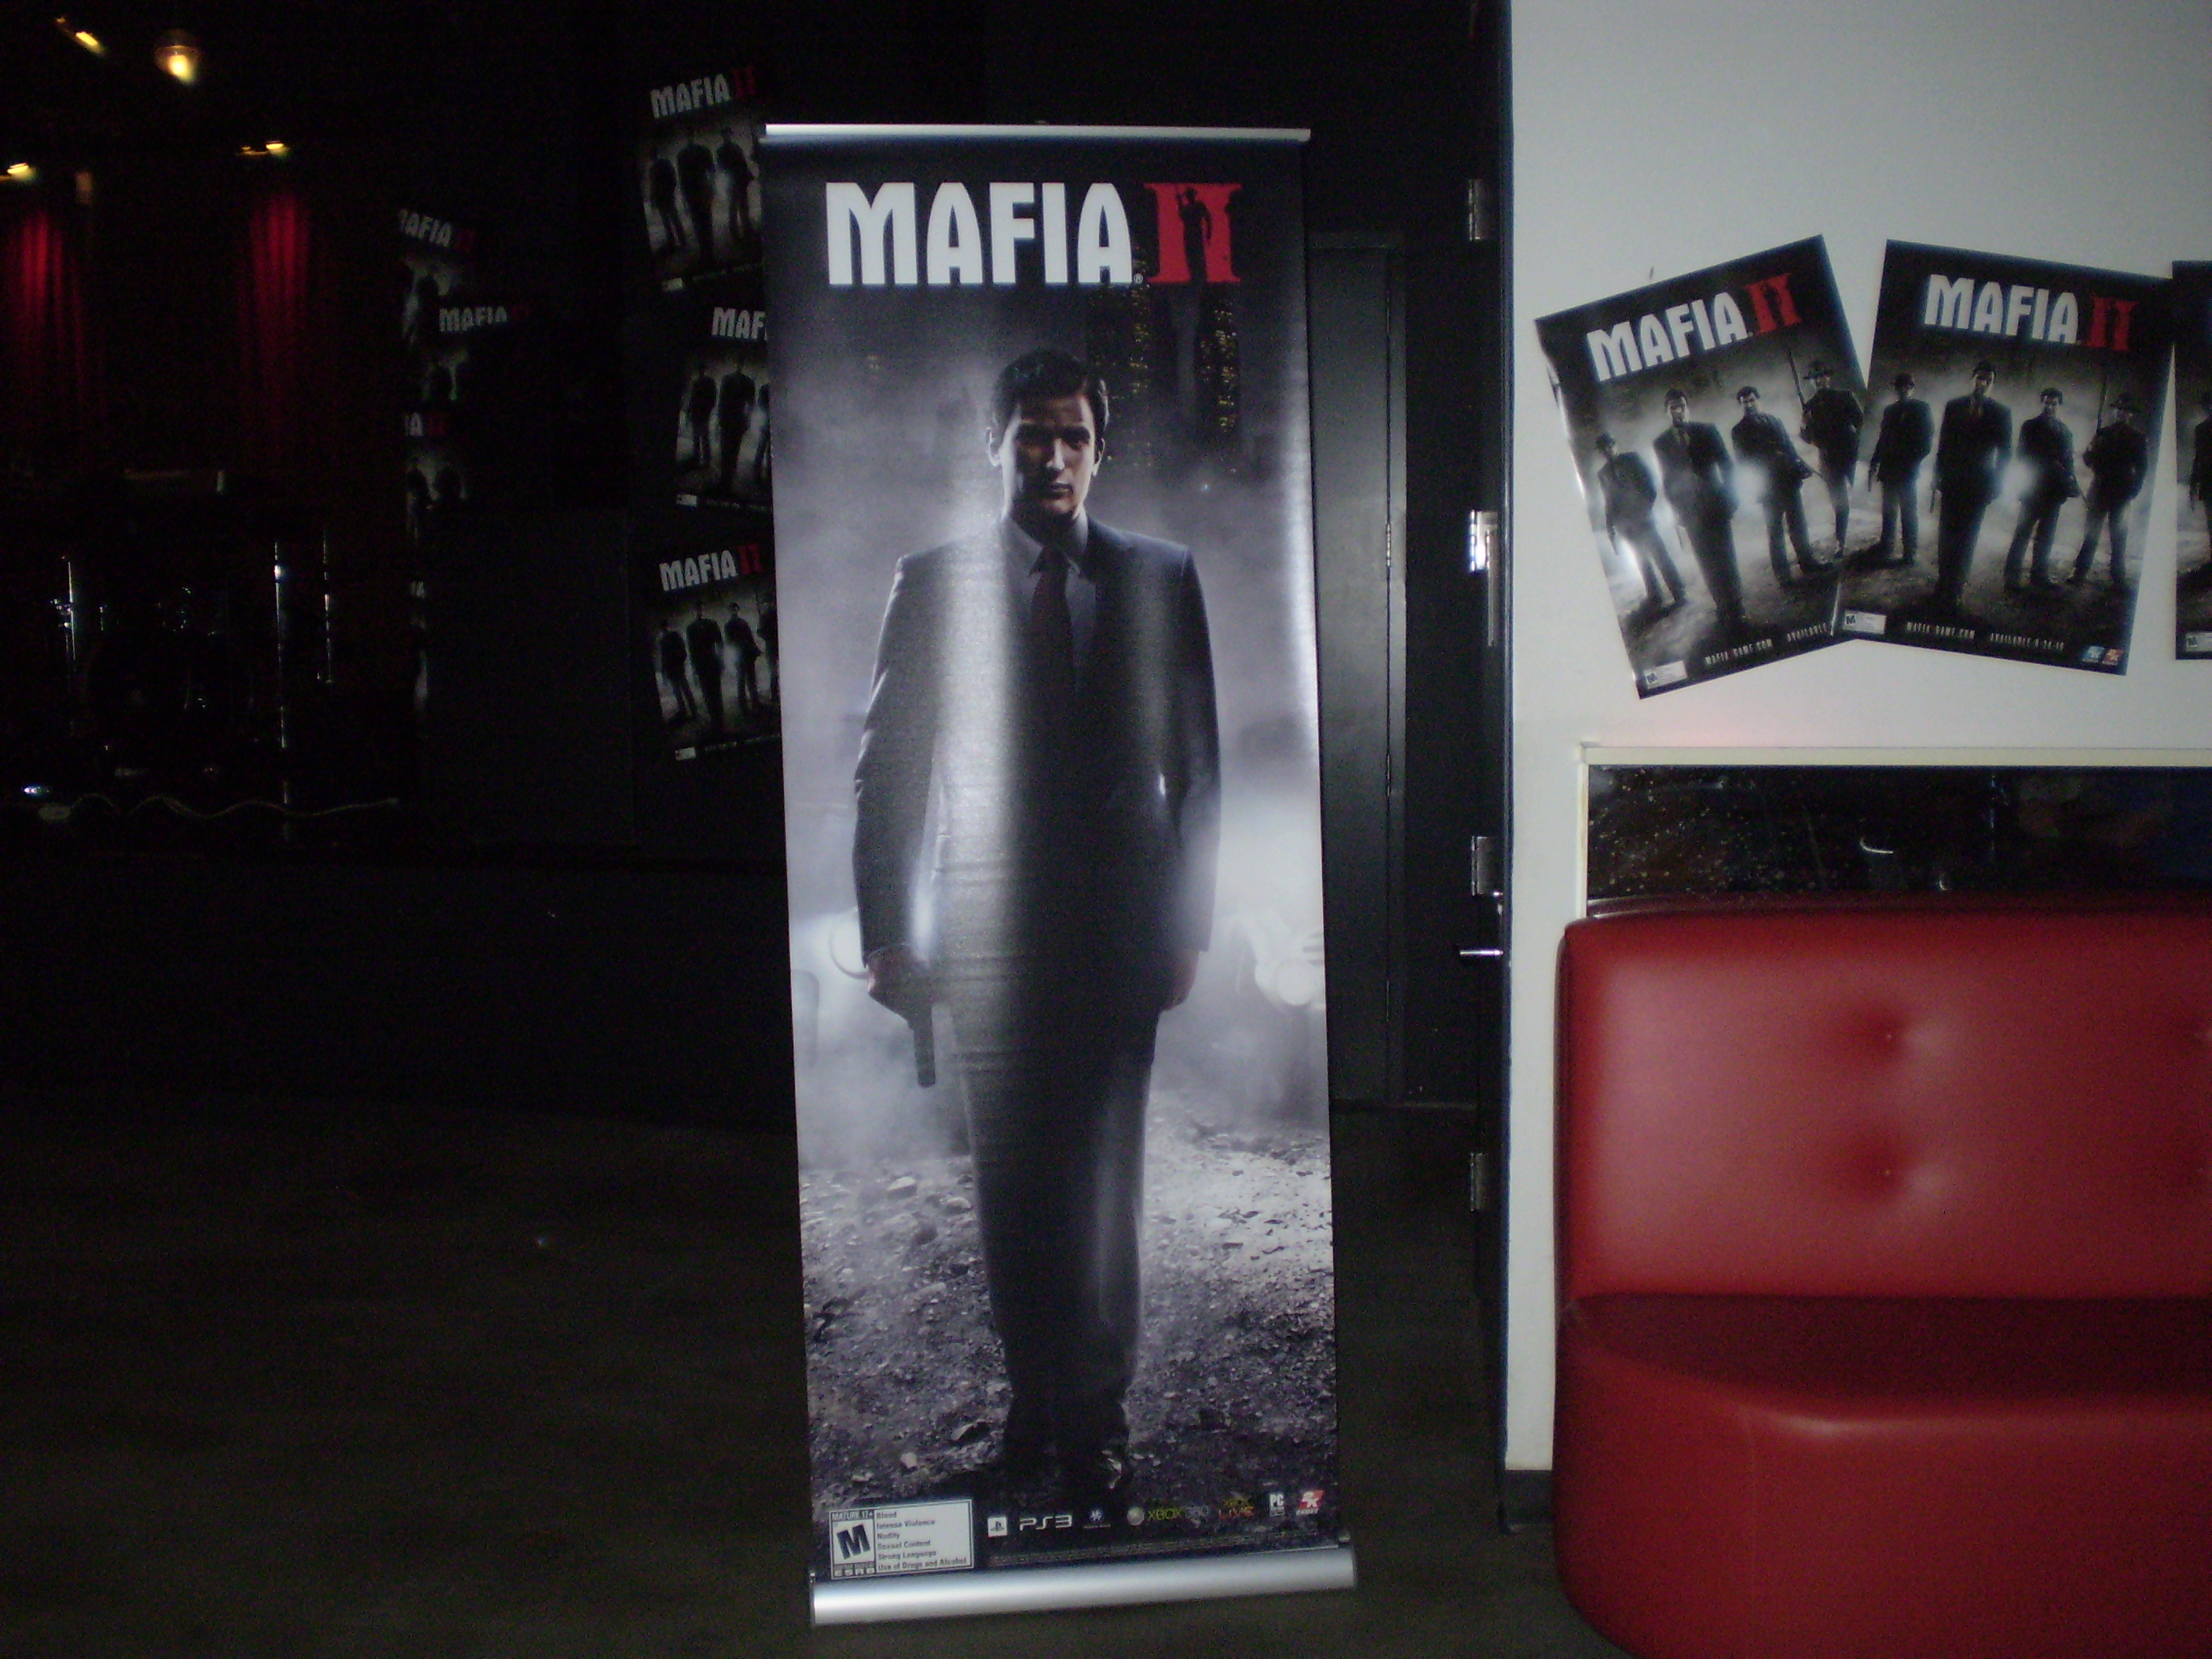 A poster of protagonist Vito from Mafia II.